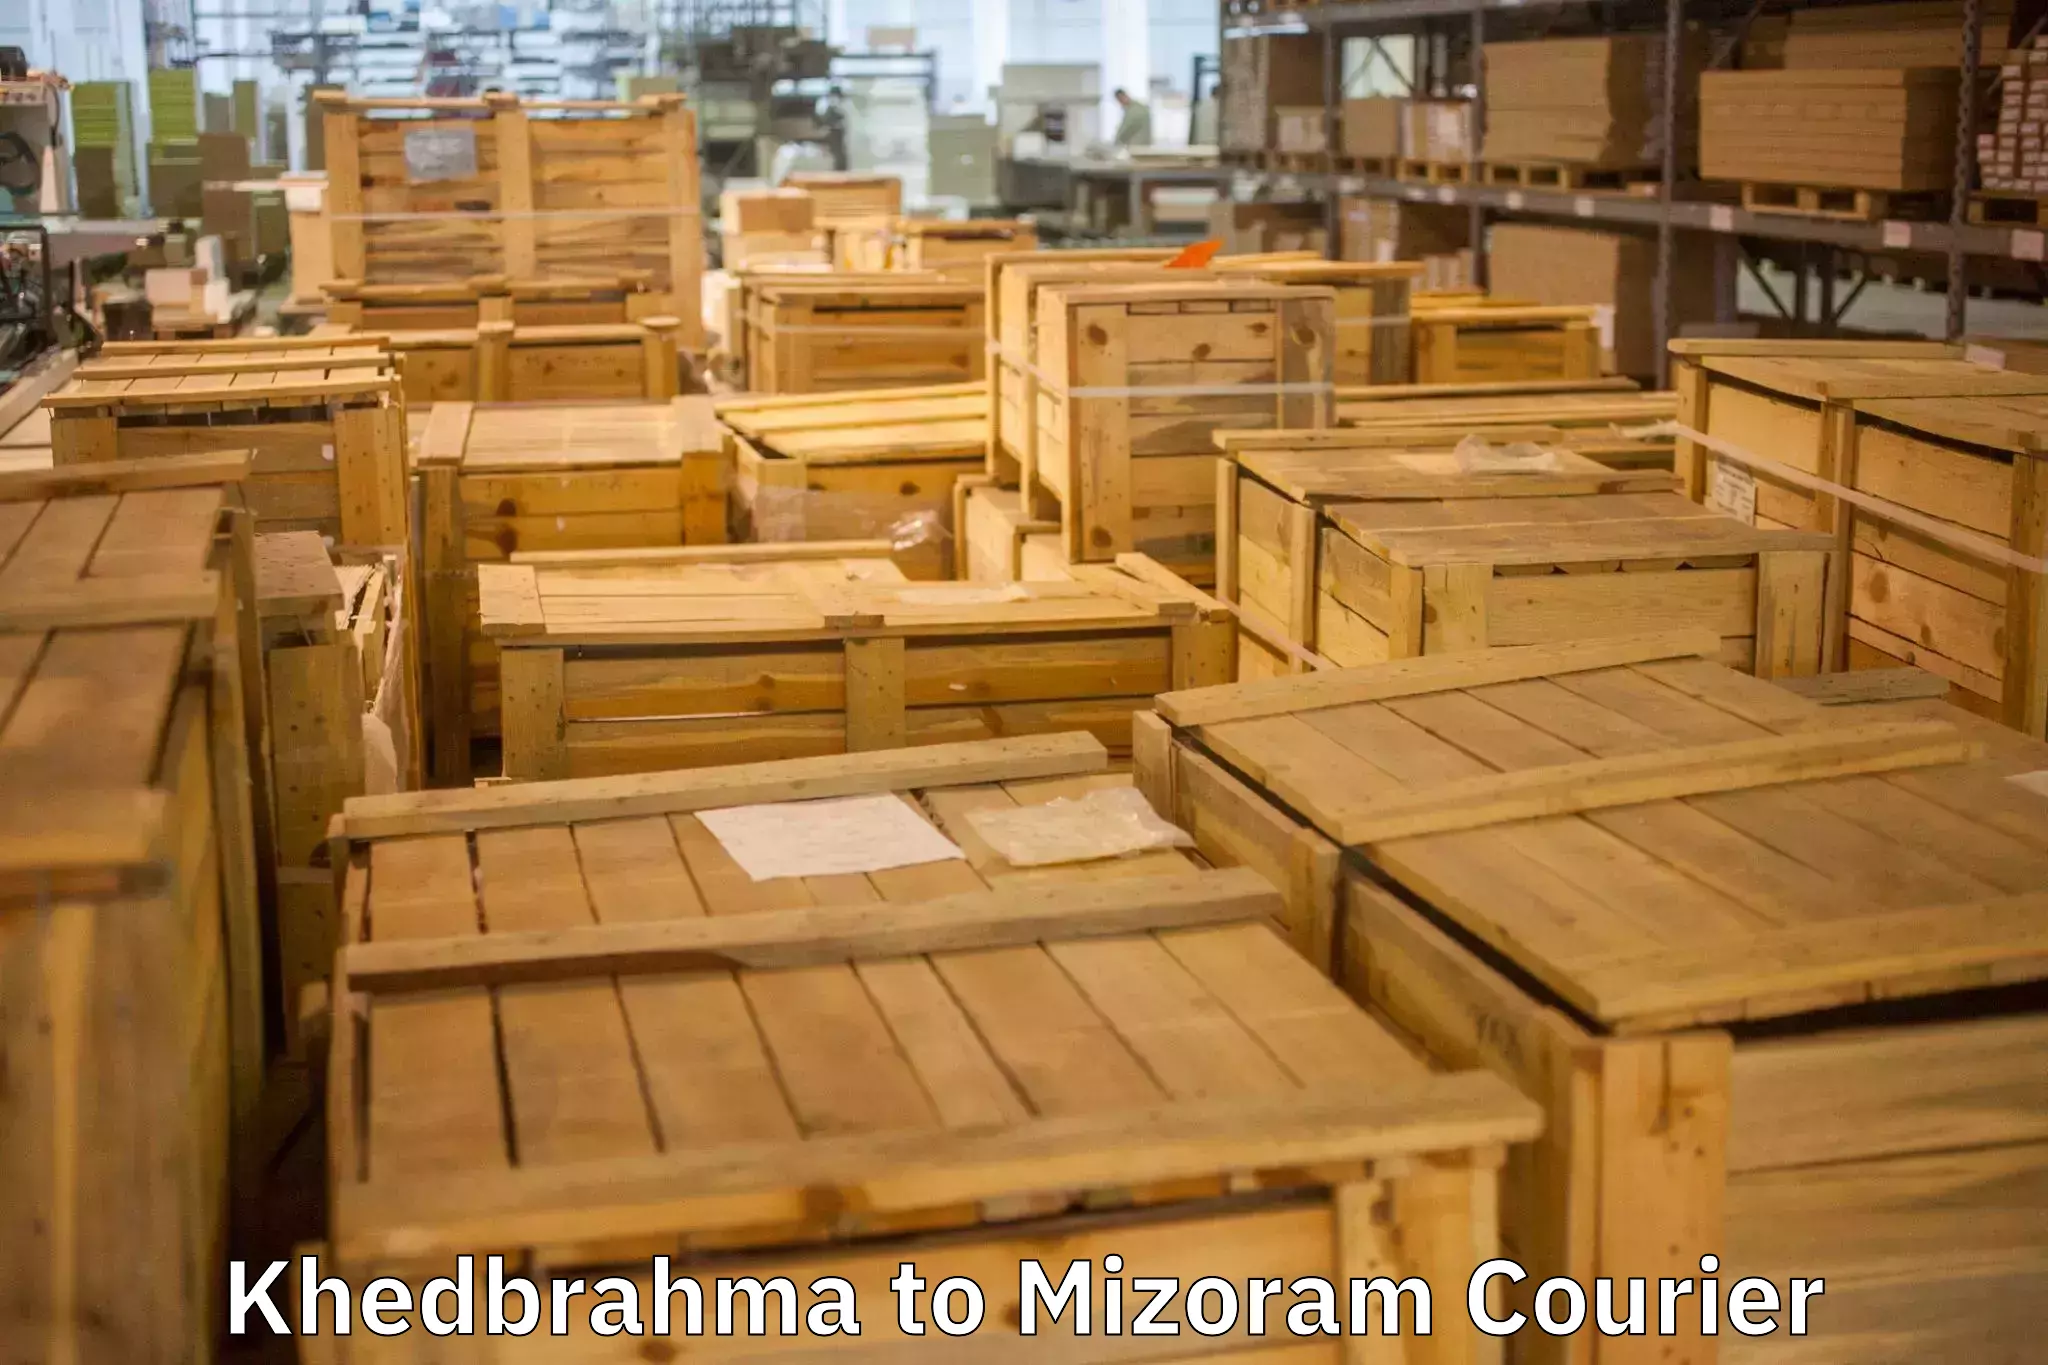 Full-service movers in Khedbrahma to Mizoram